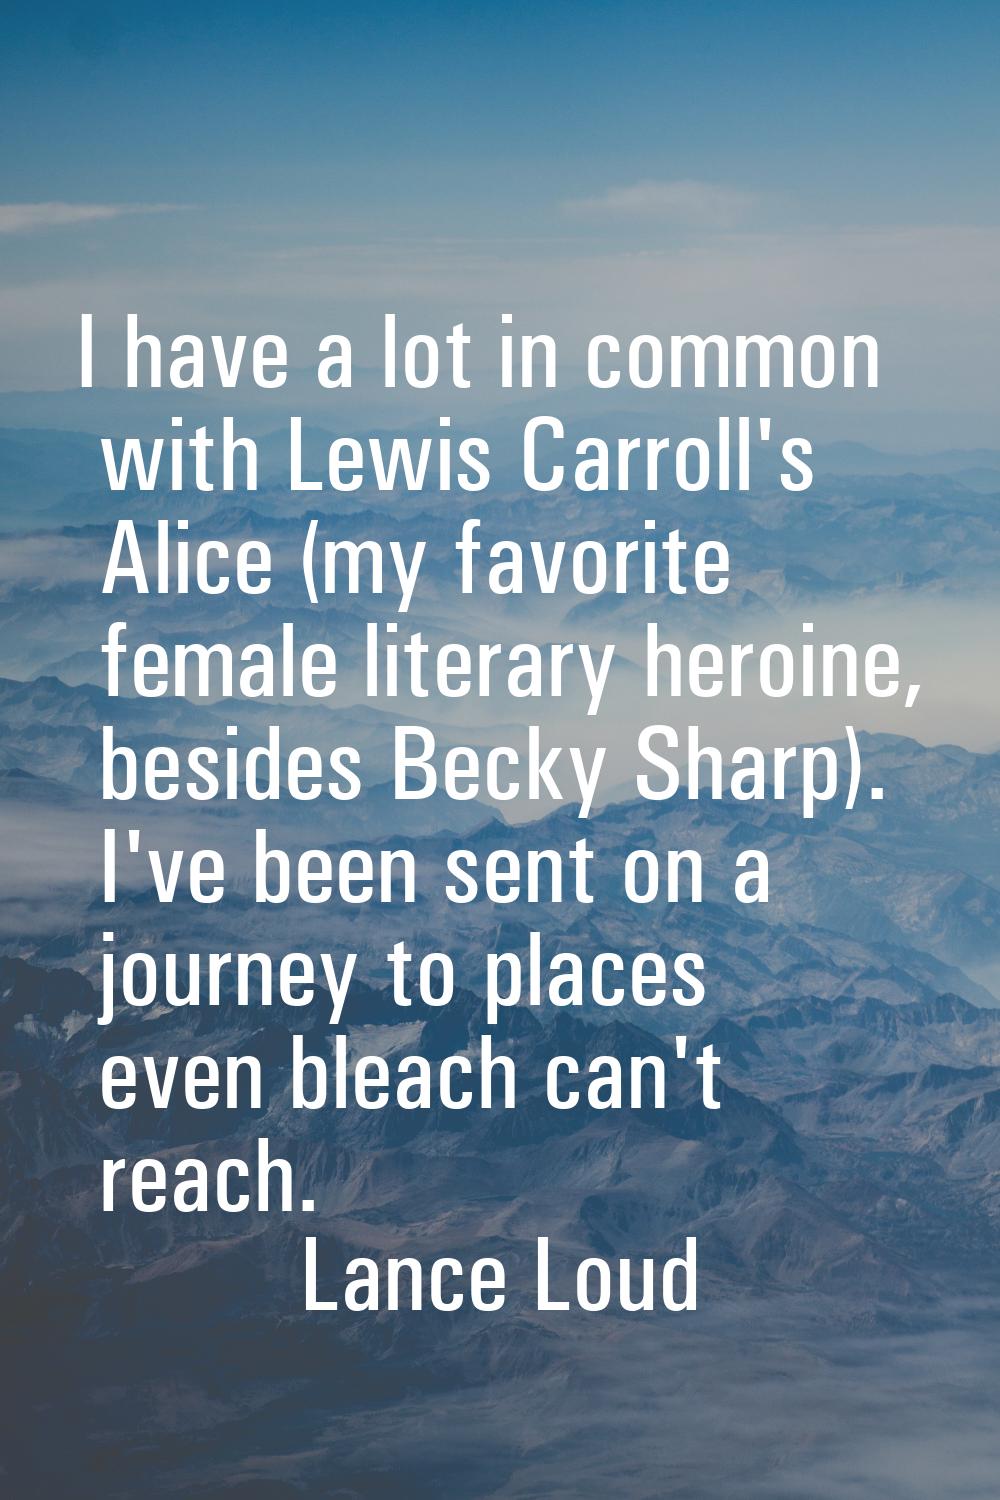 I have a lot in common with Lewis Carroll's Alice (my favorite female literary heroine, besides Bec